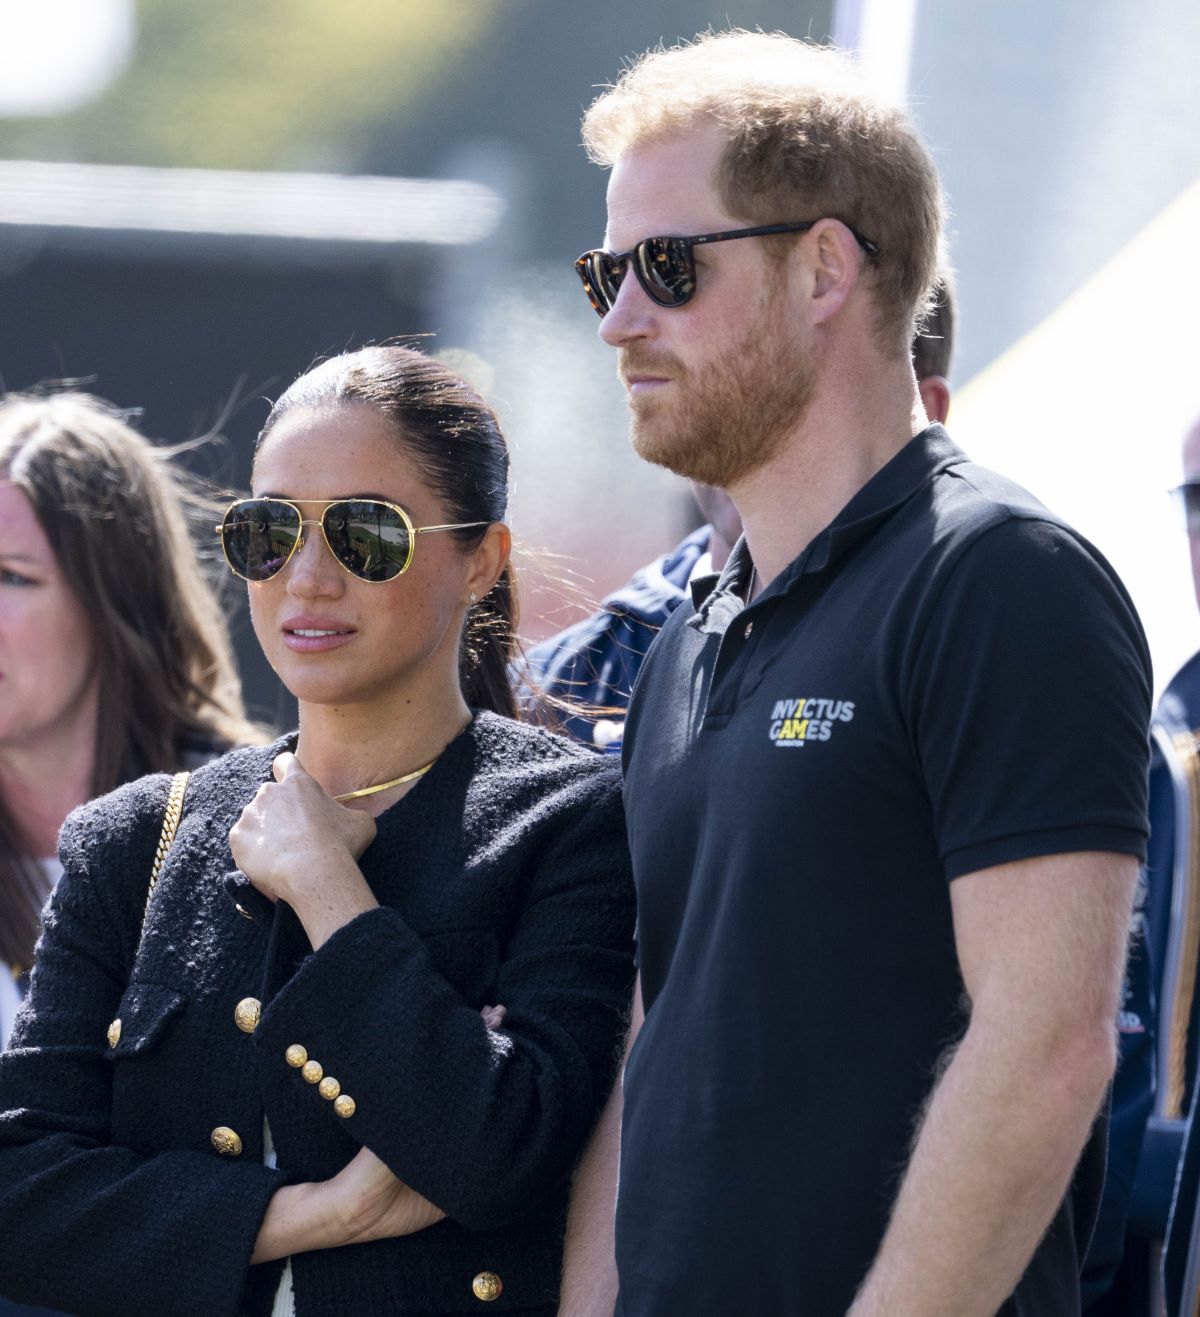 Meghan Markle and Prince Harry at The Land Rover Driving Challenge during the Invictus Games in The Hague, Netherlands